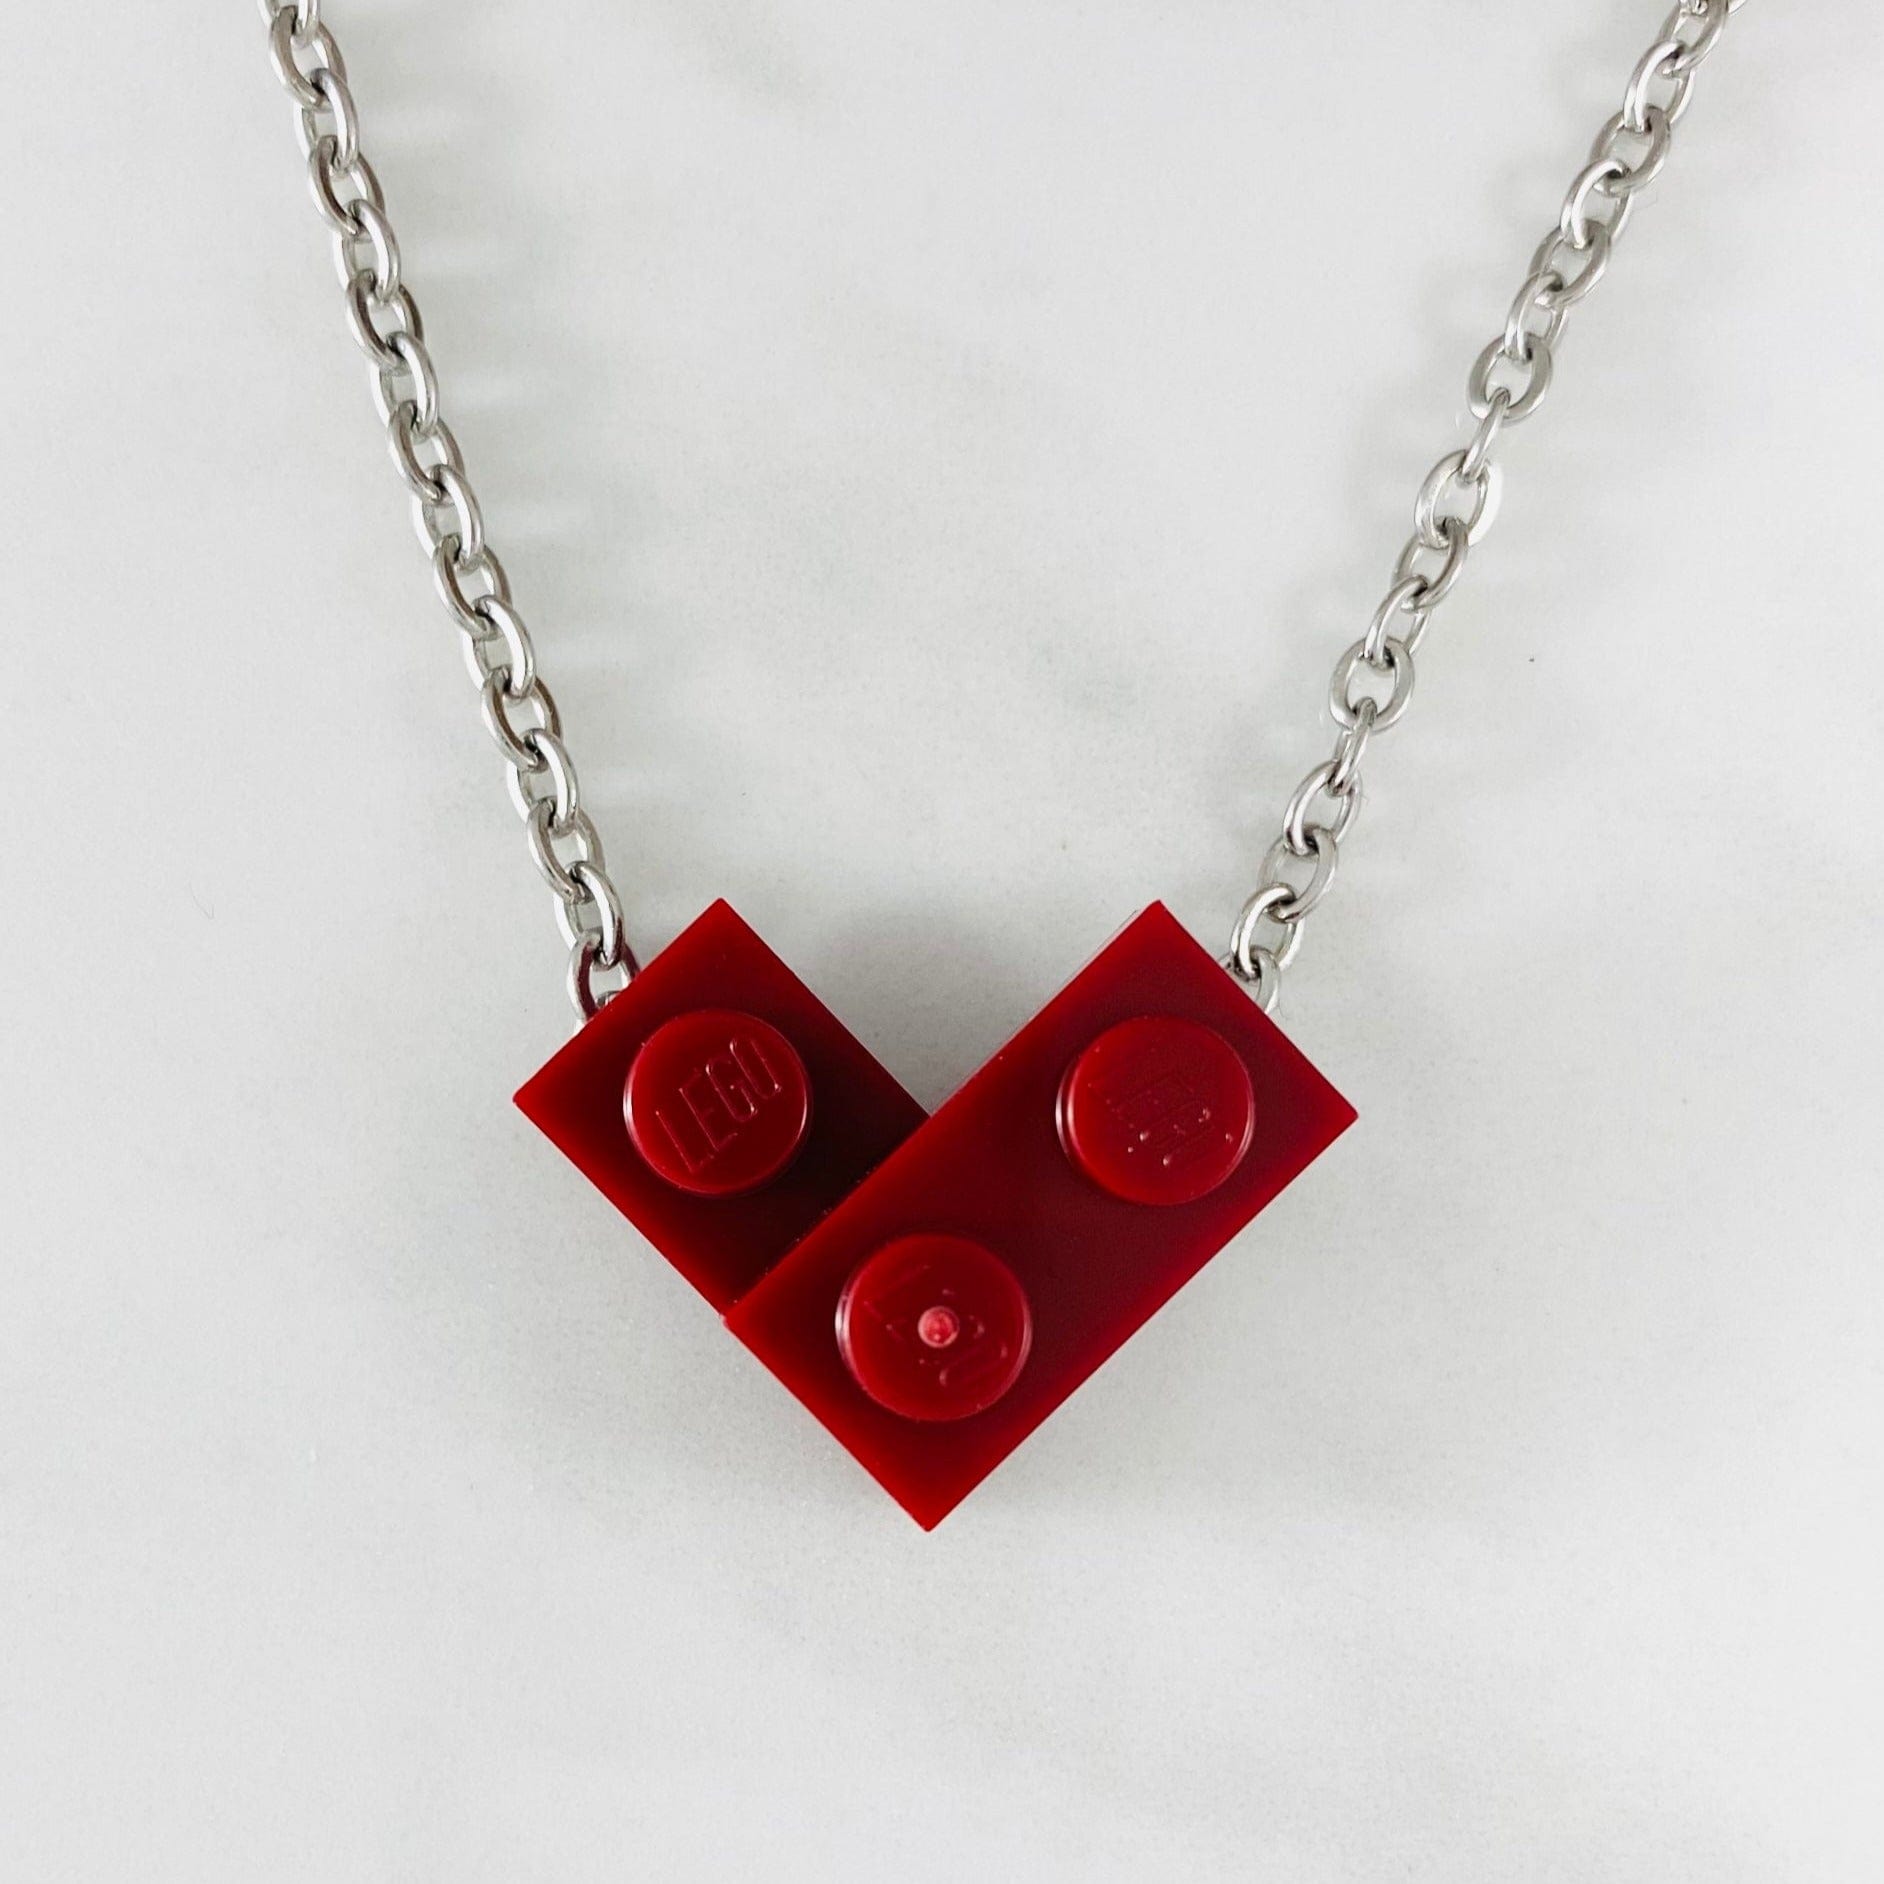 Tu Snaps necklace made from Lego pieces